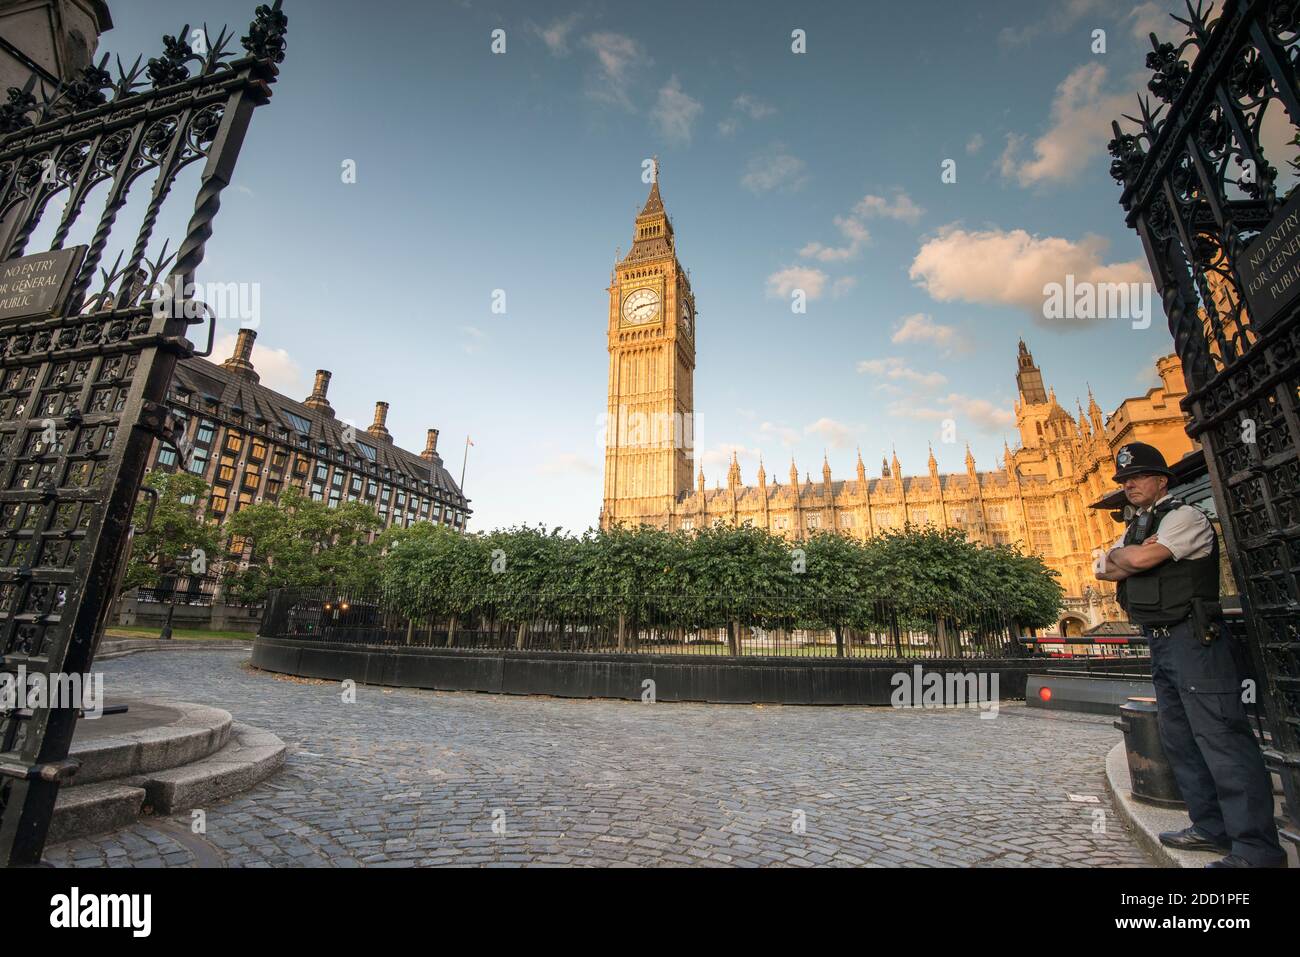 image of Elizabeth tower also known as Big Ben in London, England. Stock Photo